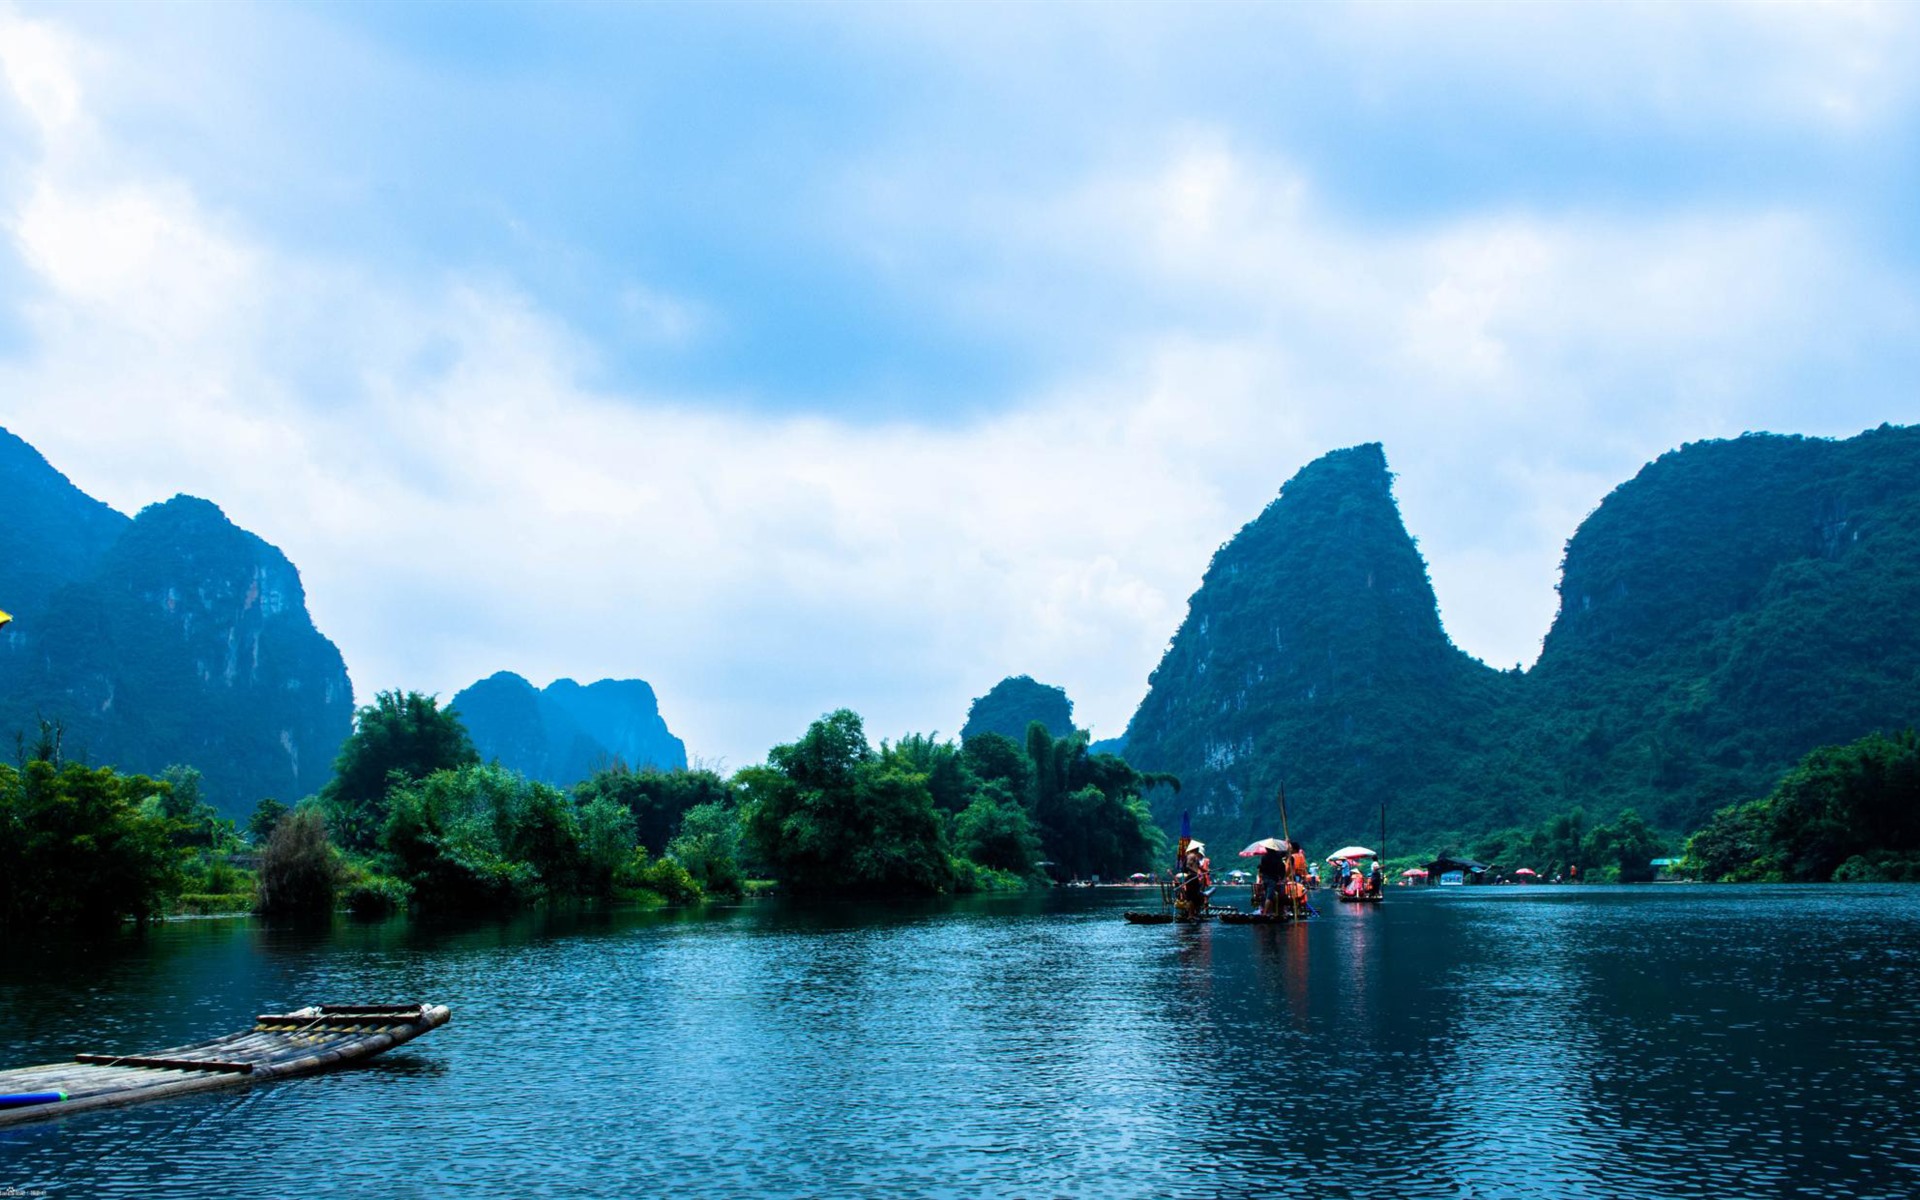 Wallpaper Guangxi, Guilin, China, mountains, river, boats, nature scenery 1920x1200 HD Picture, Image